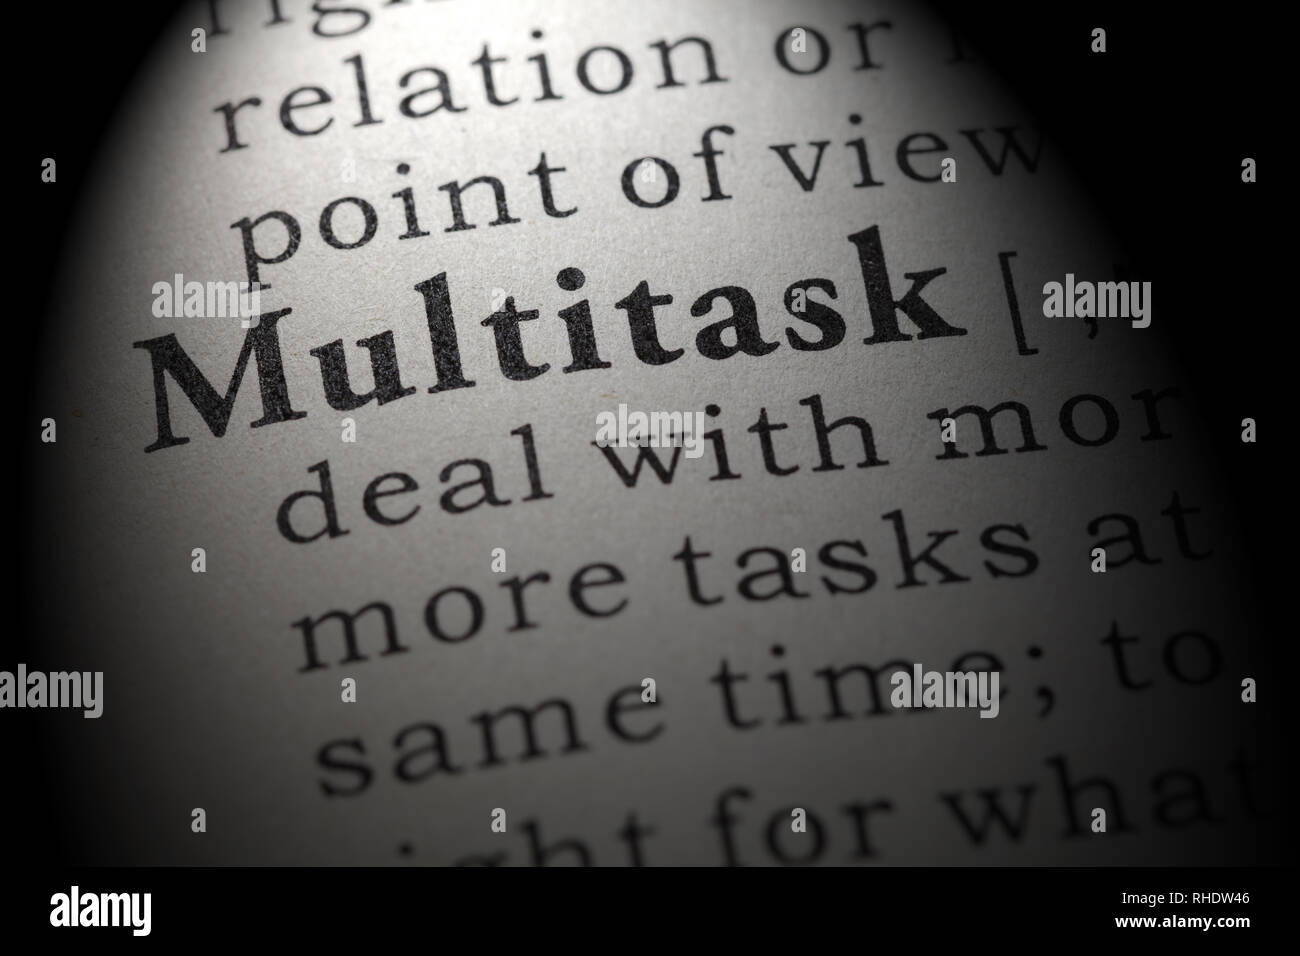 Fake Dictionary, Dictionary definition of the word multitask. including key descriptive words. Stock Photo